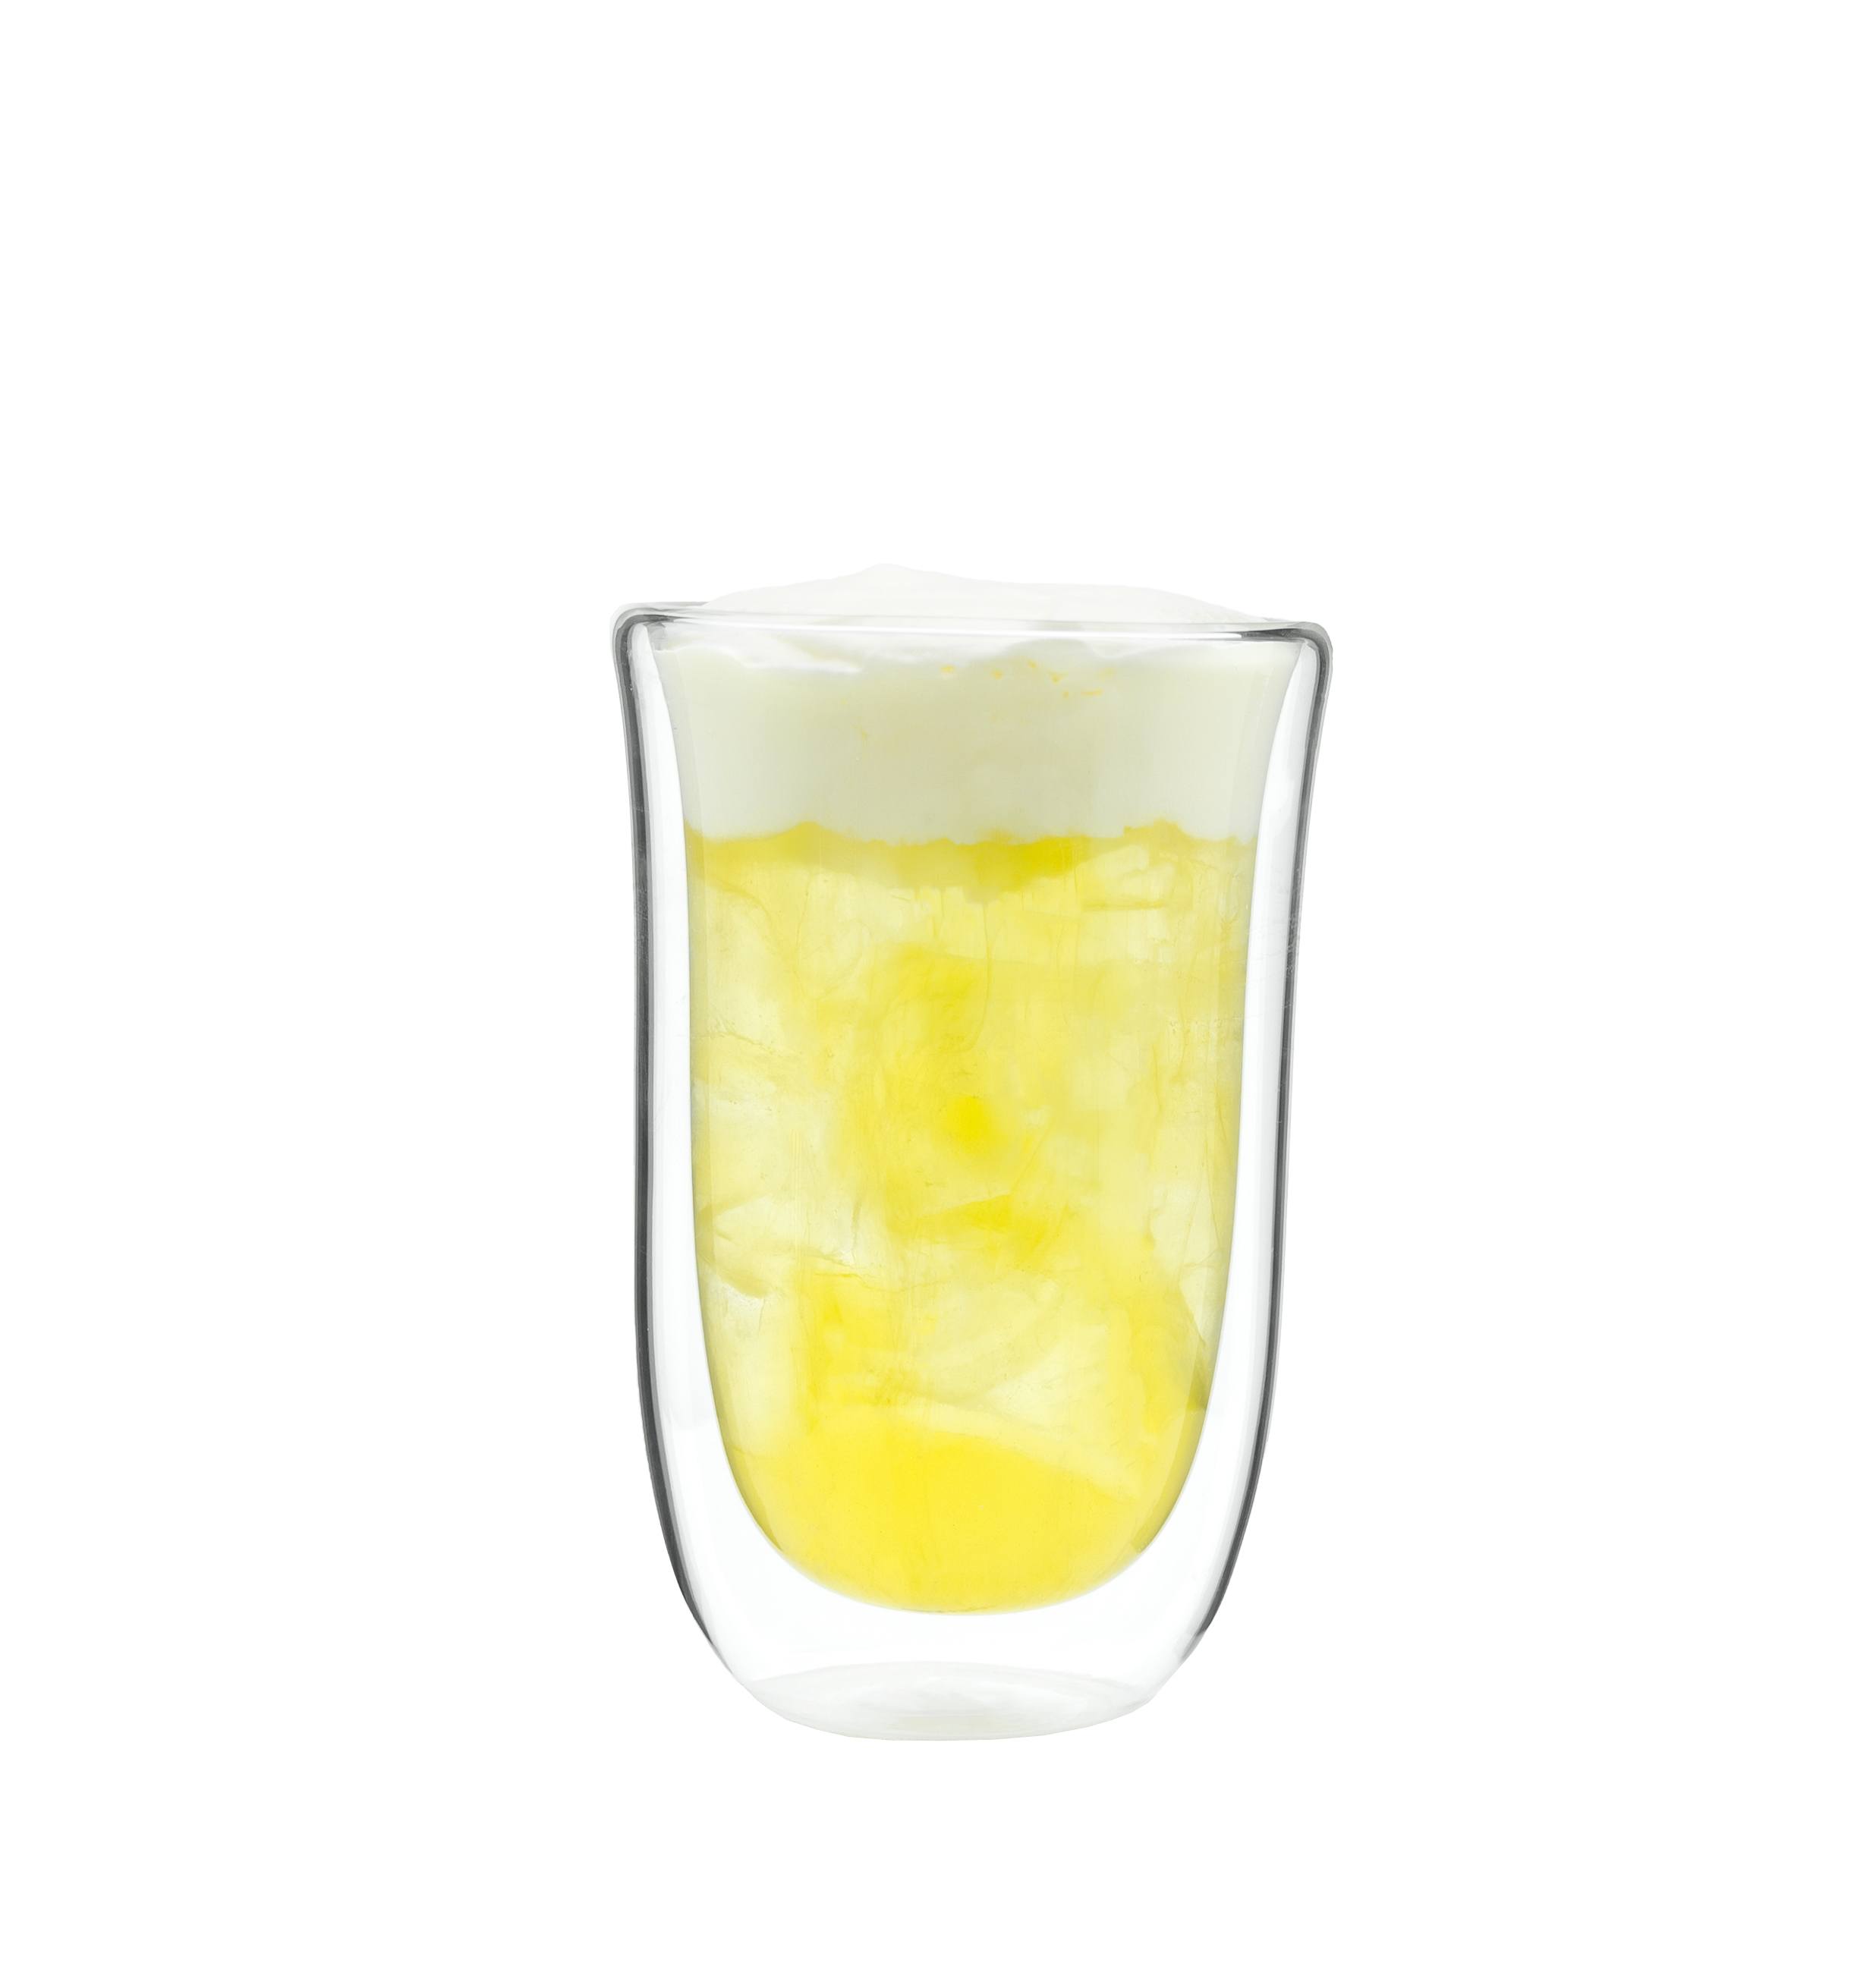 Product photography of beverages and glasses